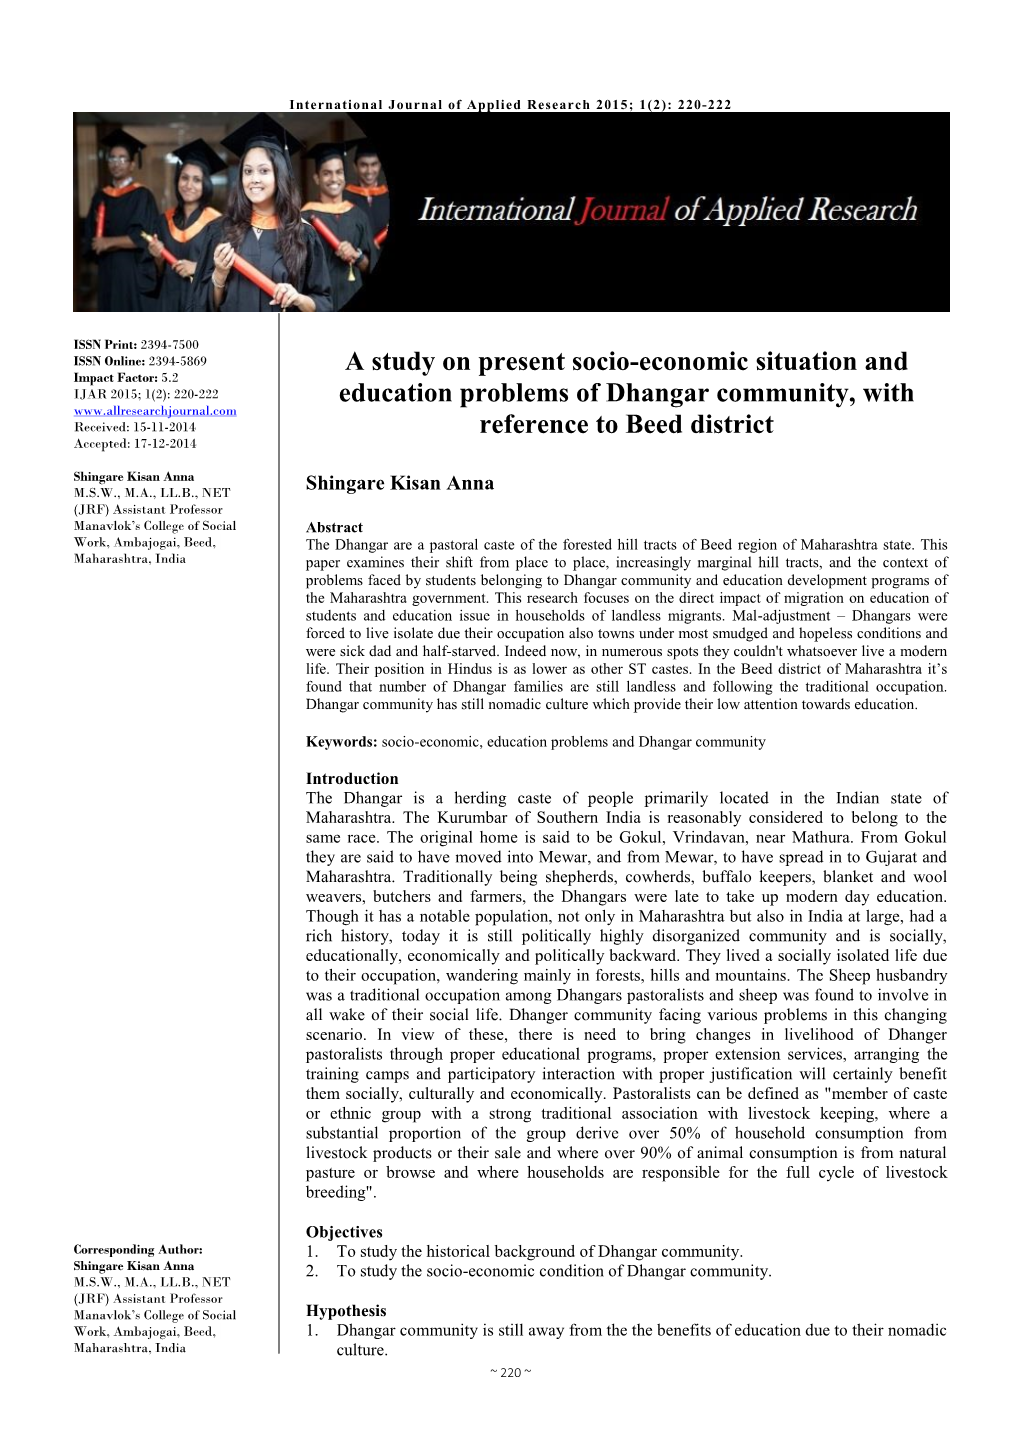 A Study on Present Socio-Economic Situation and Education Problems Of